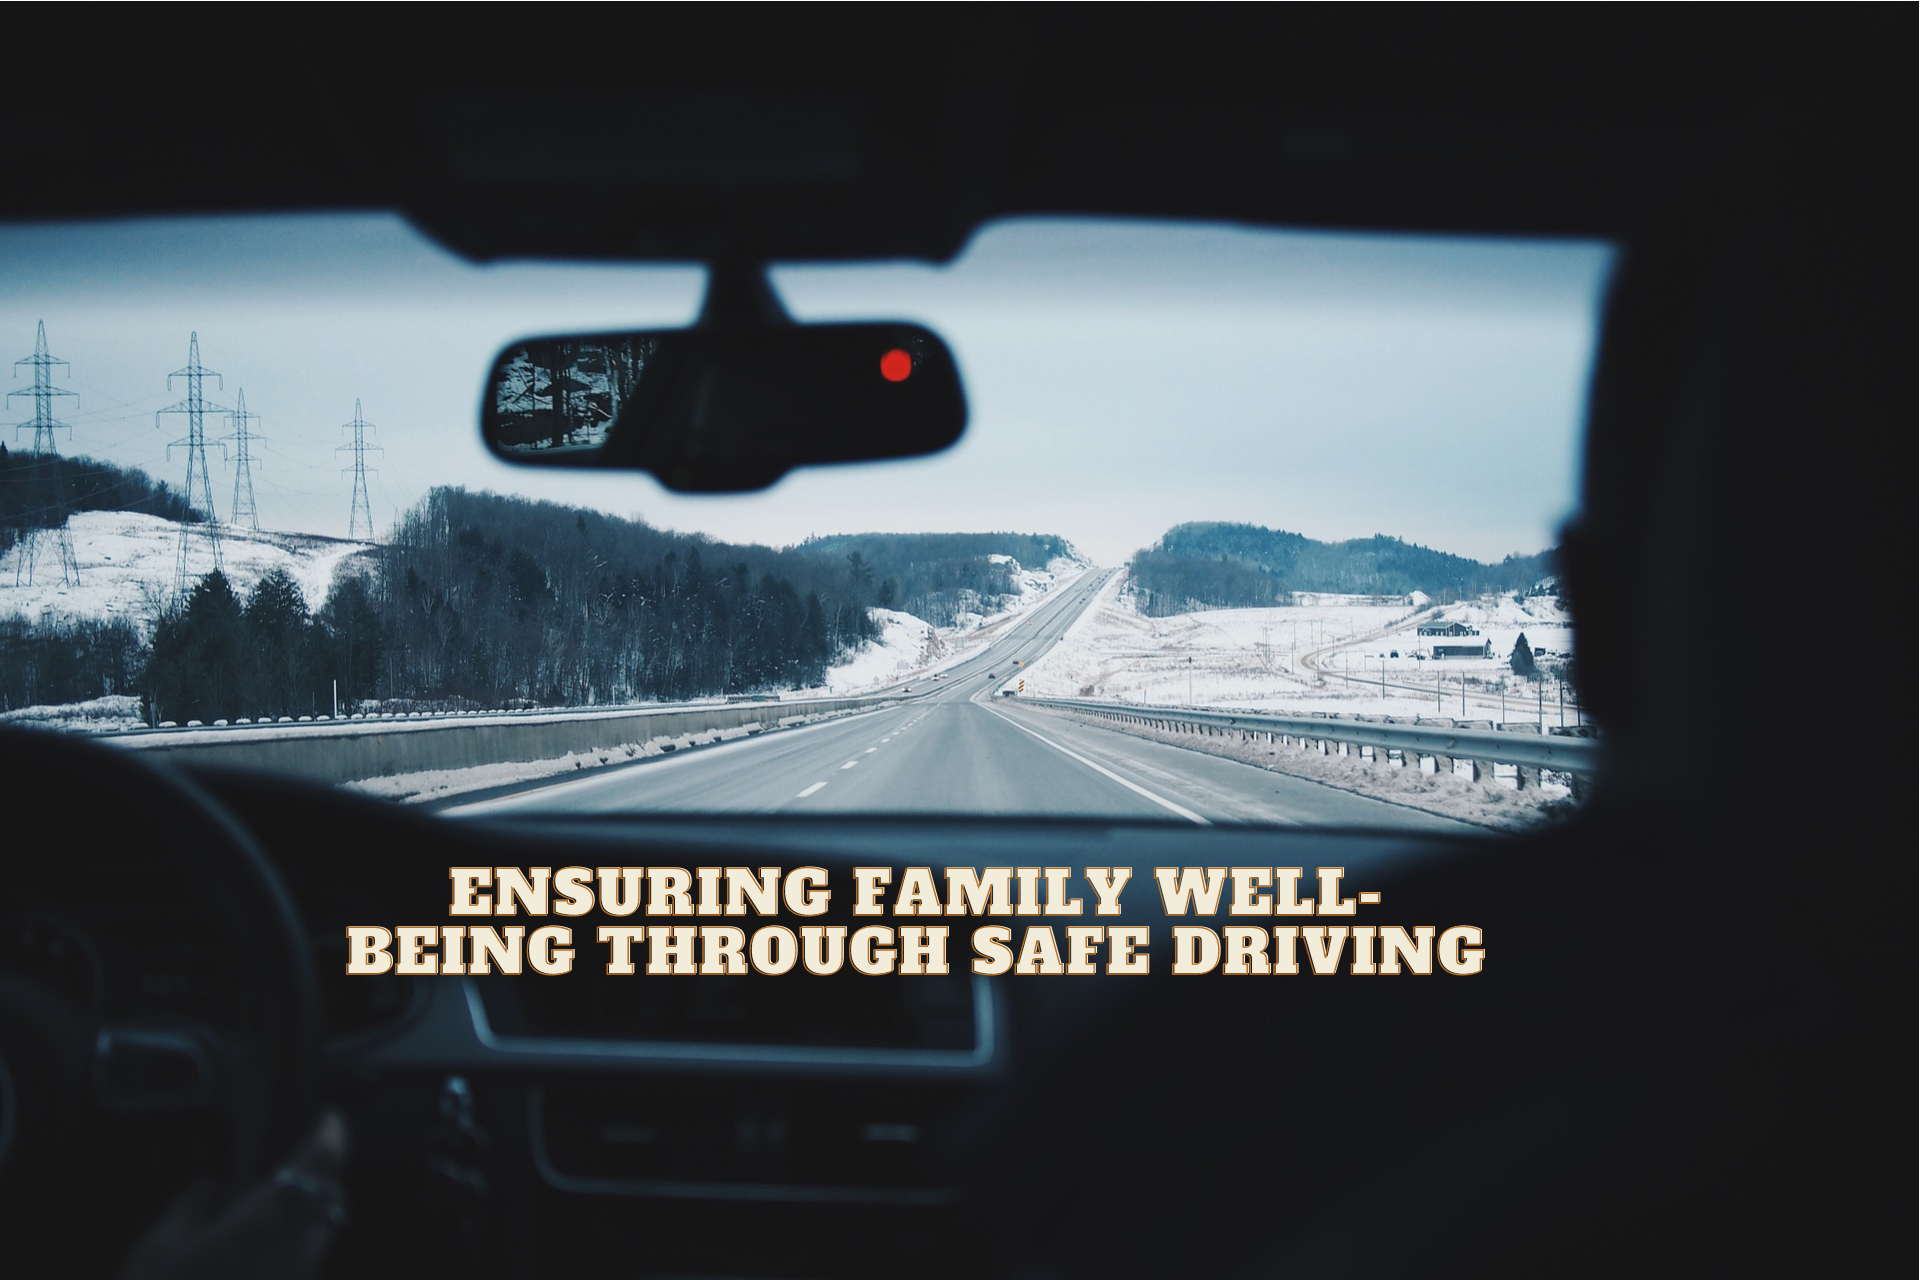 Ensuring Family Well-Being Through Safe Driving